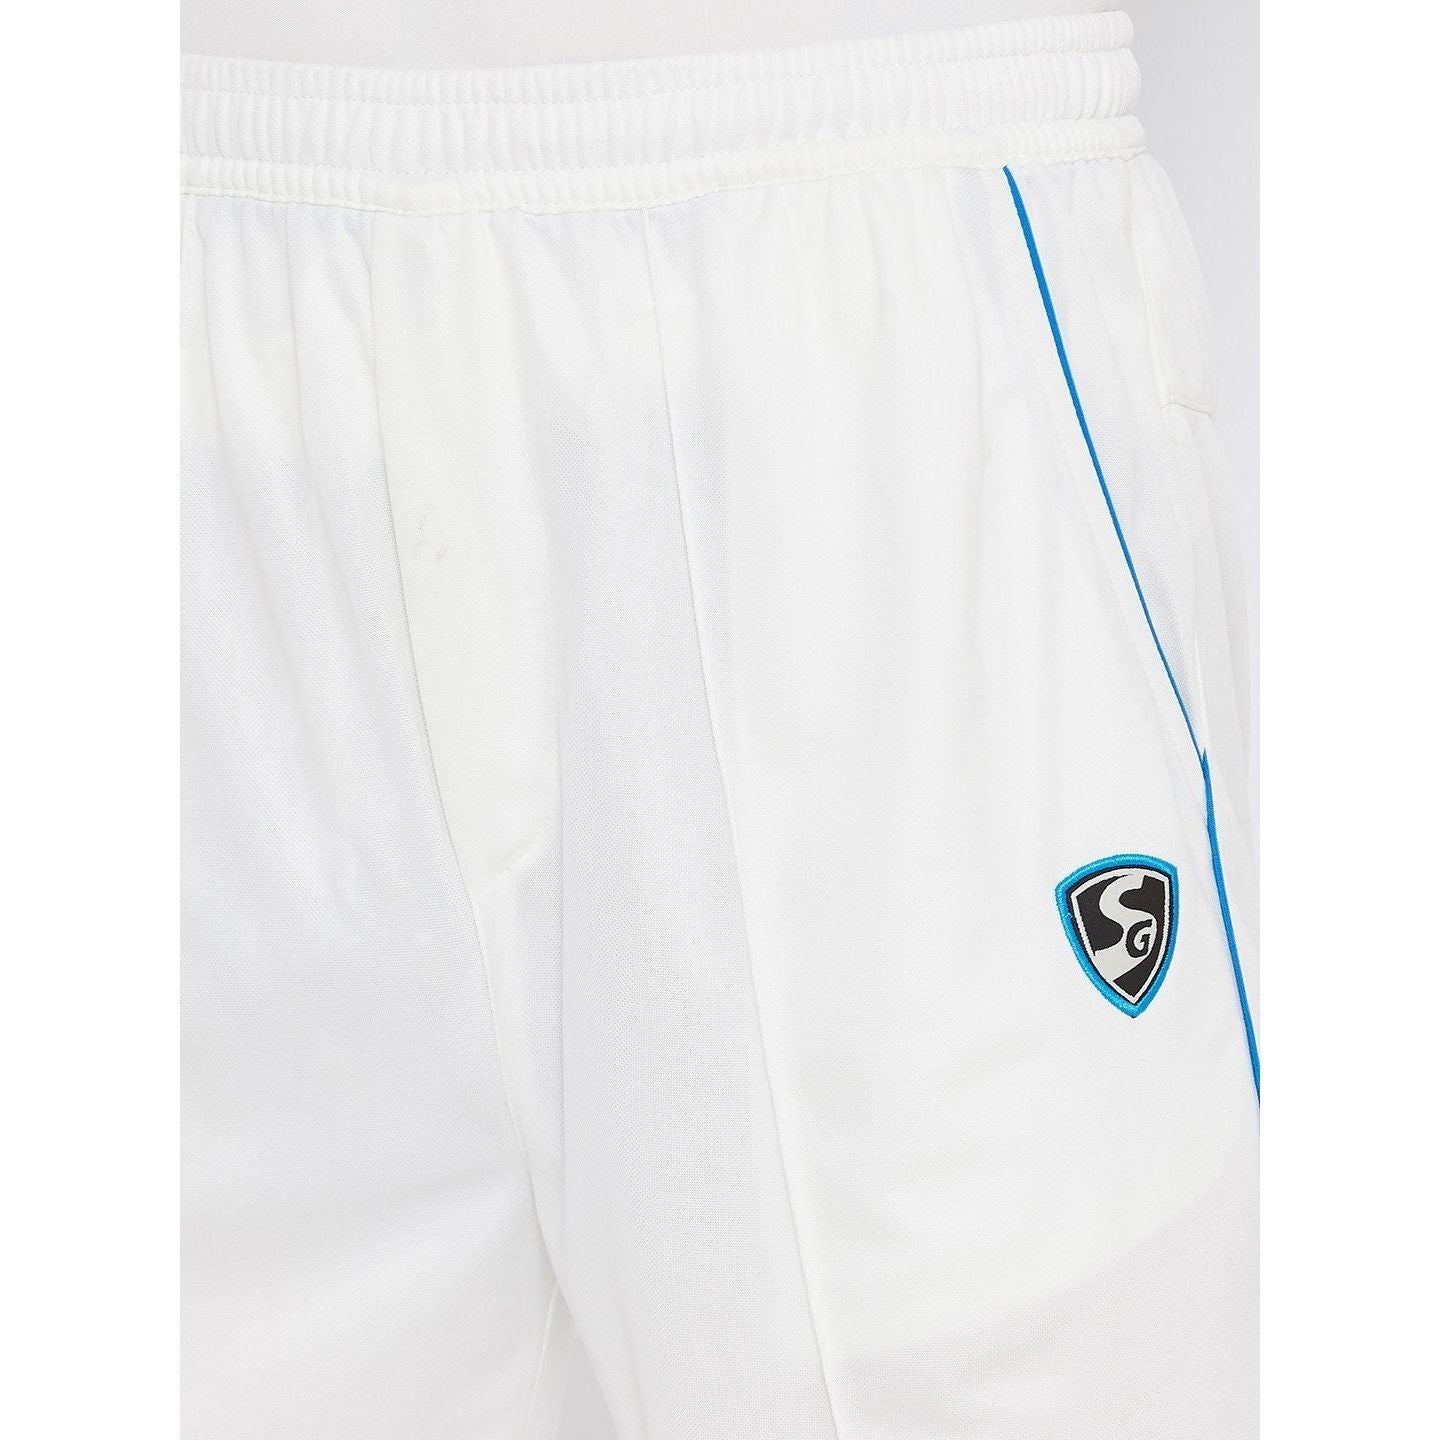 SG Savage 2.0 Cricket Pant – Sports Wing | Shop on